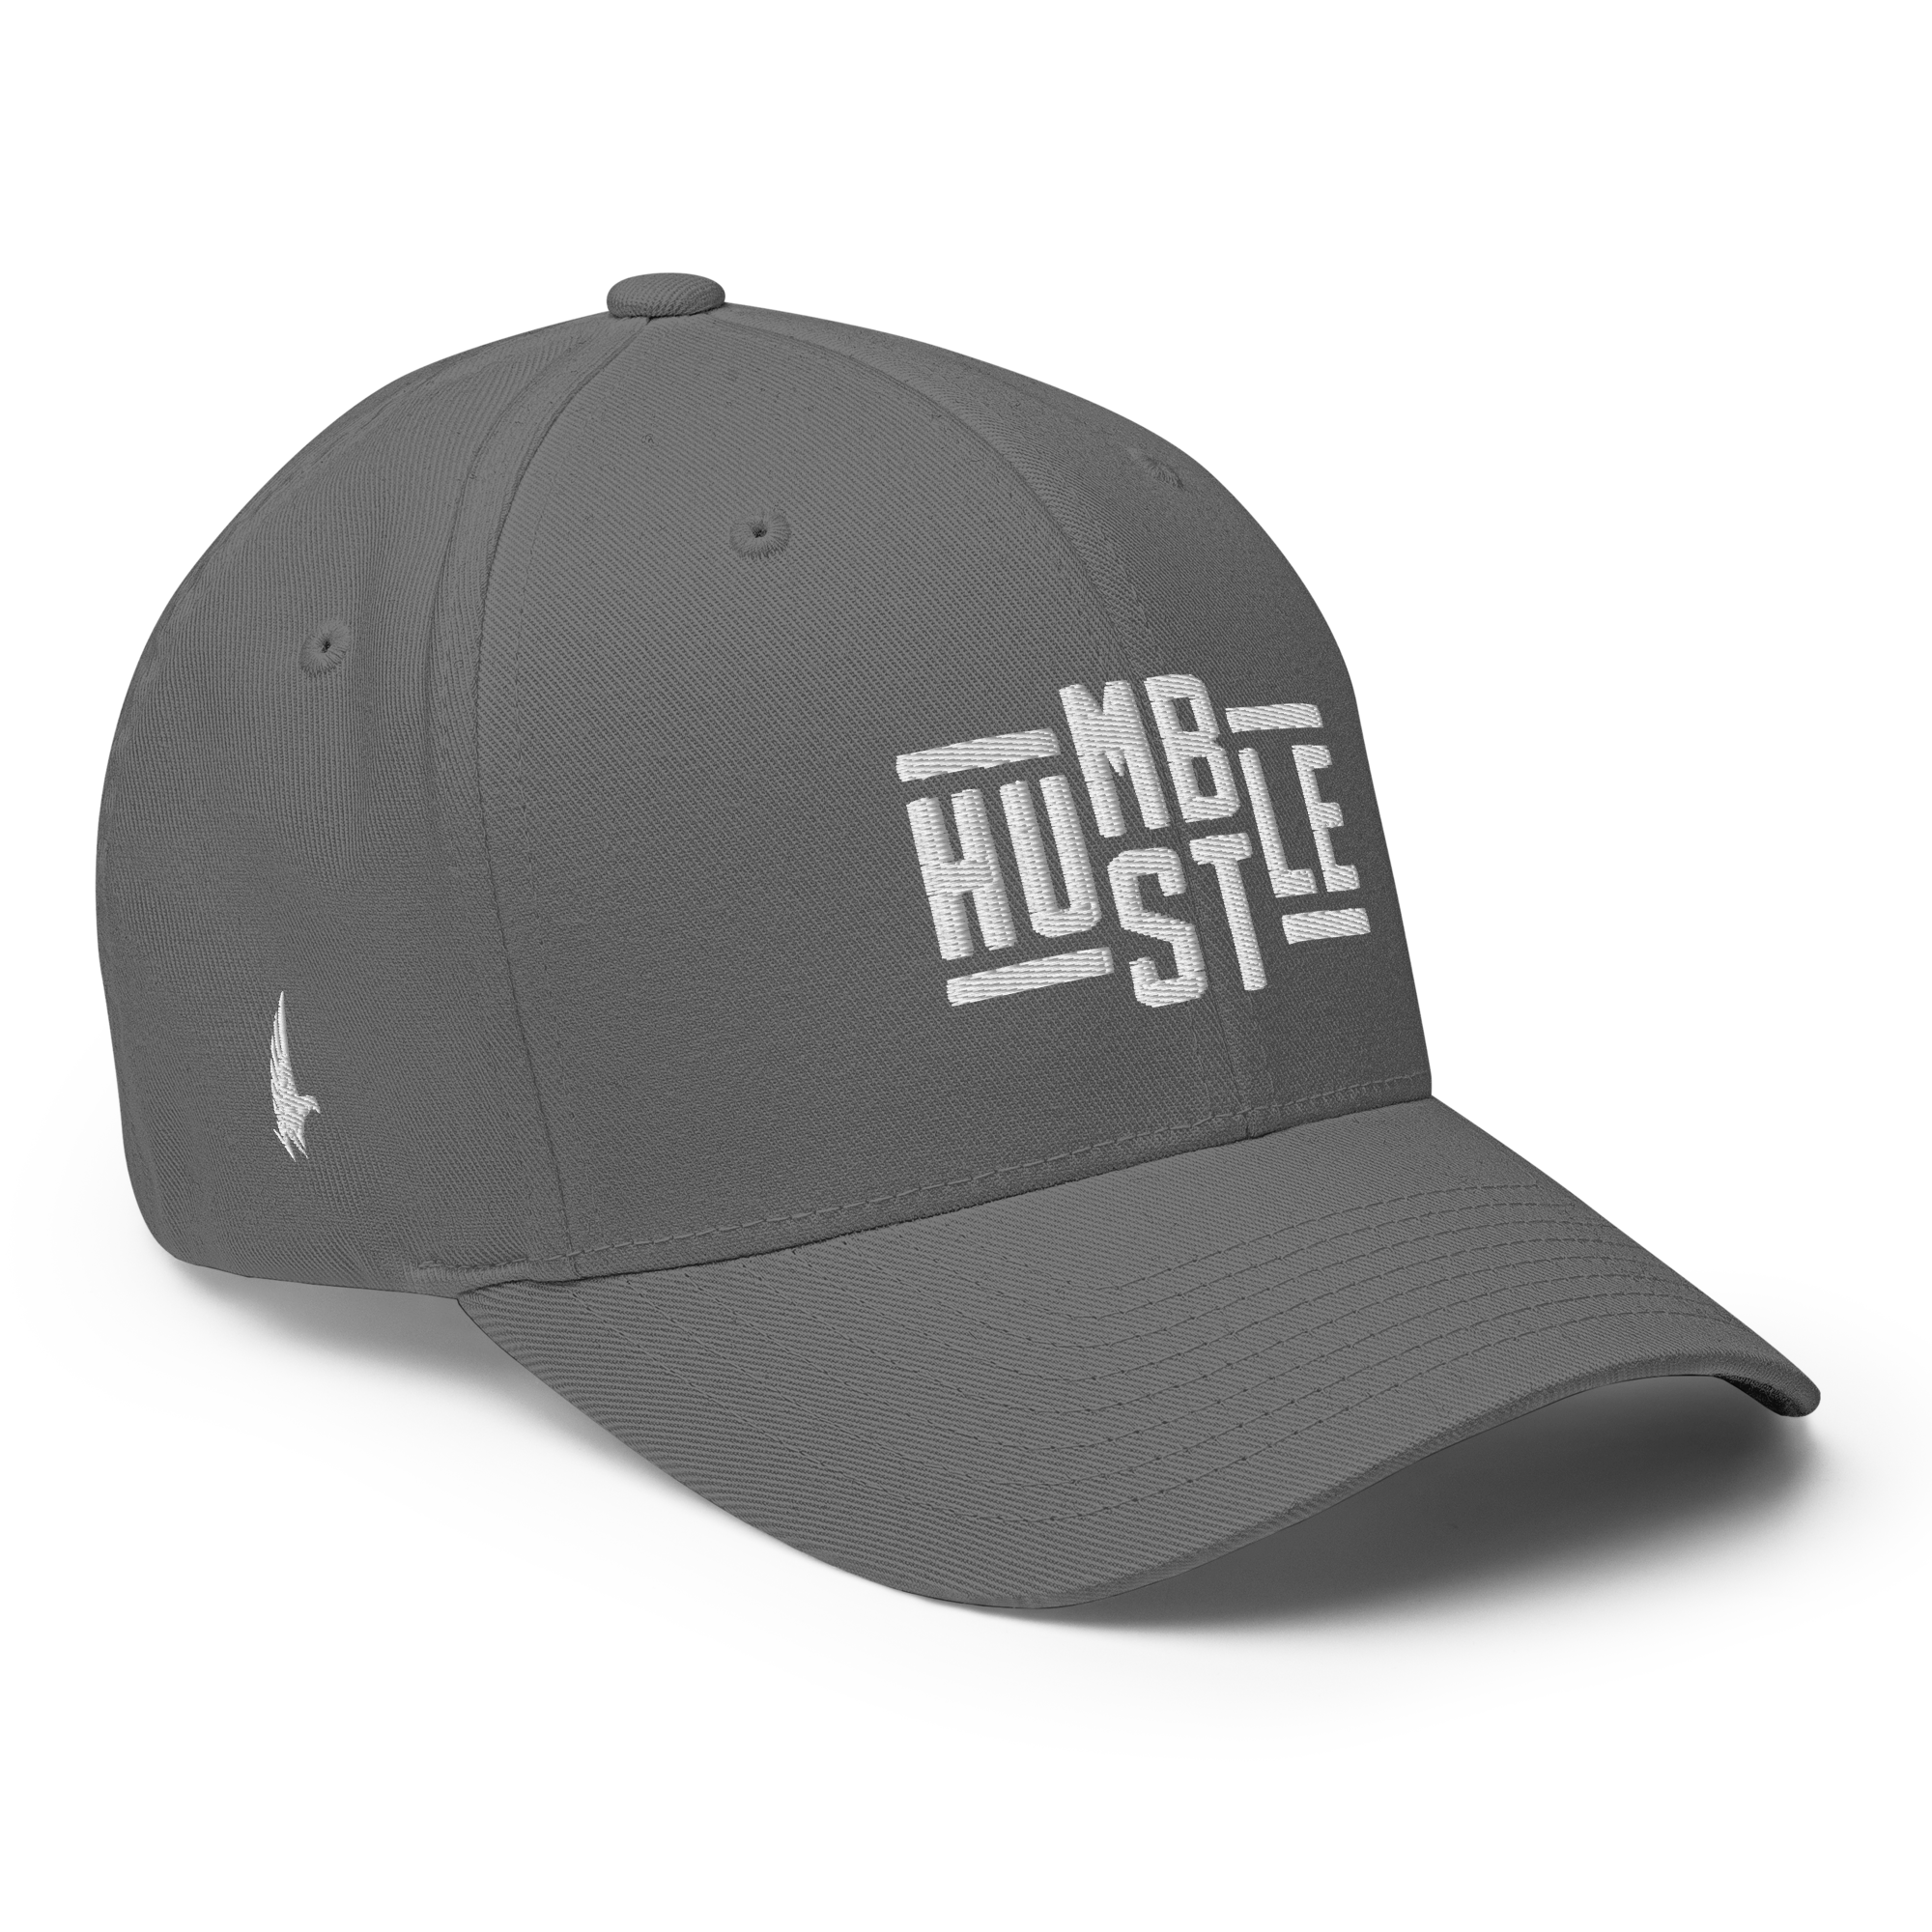 Loyalty Vibes Hustle Fitted Hat Gray / White Fitted - Loyalty Vibes